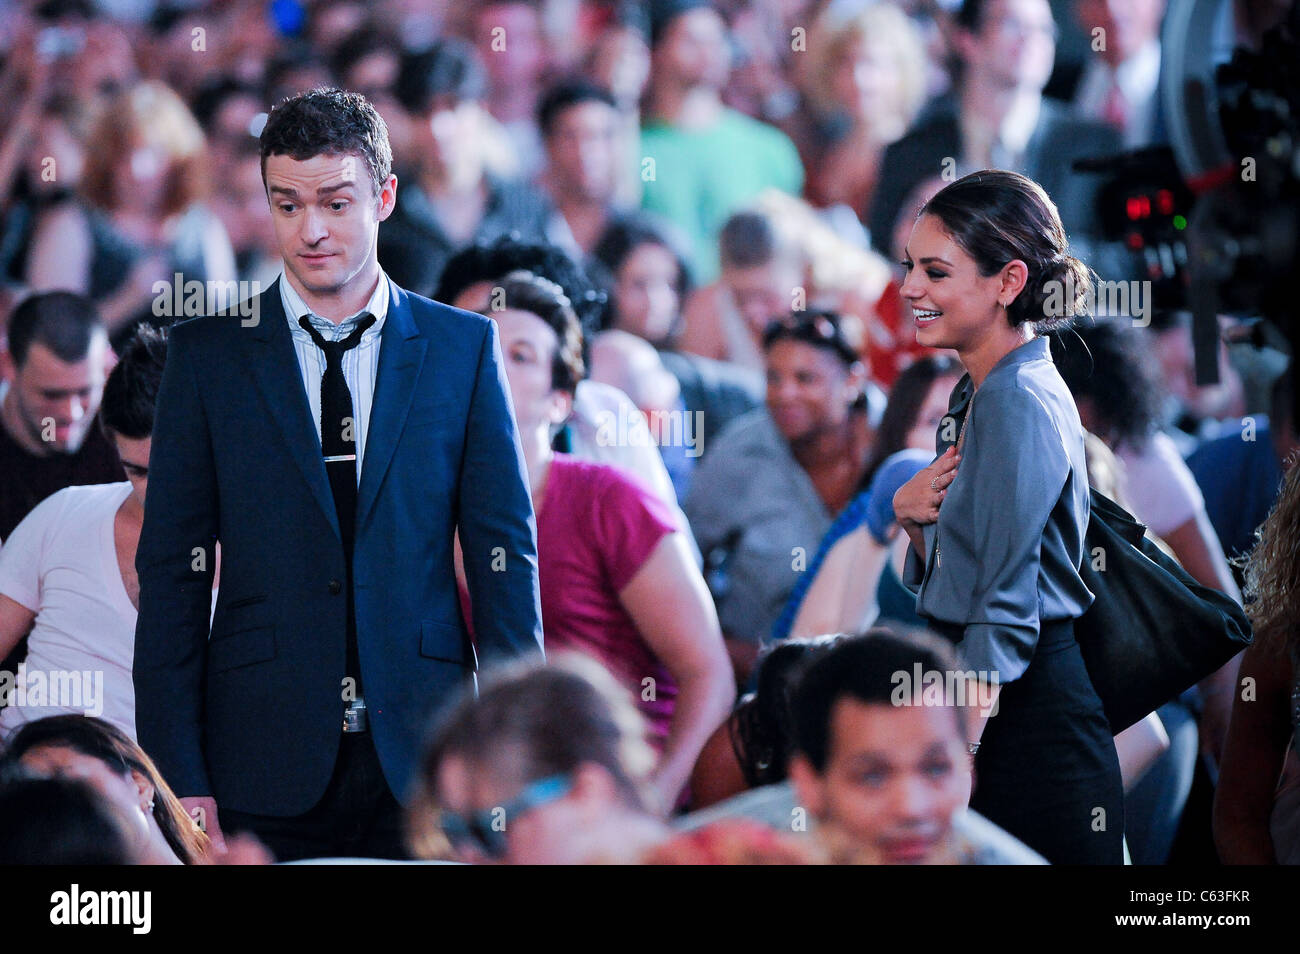 Justin Timberlake, Mila Kunis, film a scene at the 'Friends With Benefits' film set in Times Square out and about for CELEBRITY Stock Photo